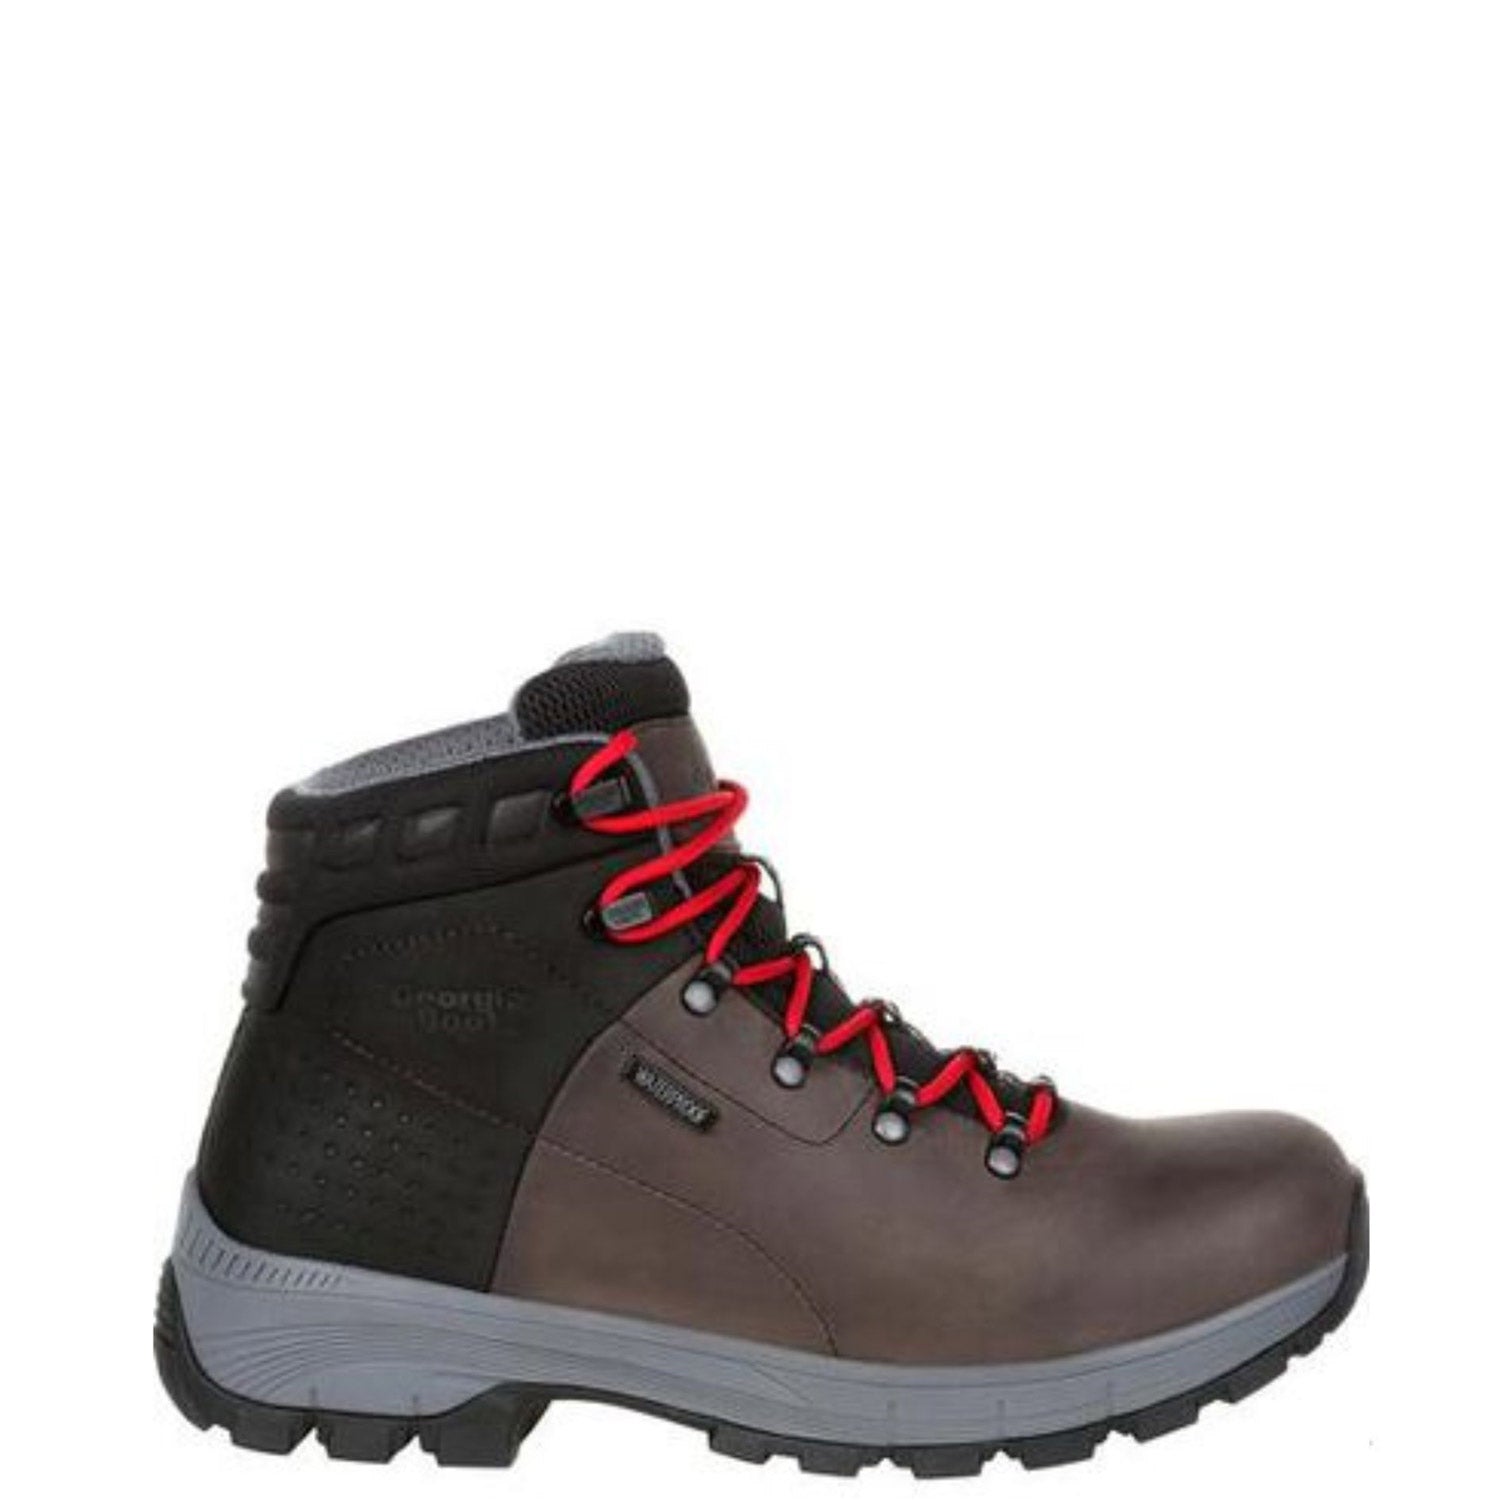 Georgia Boot Men's 6" Eagle Trail Waterproof EH Alloy Toe Work Boot - Work World - Workwear, Work Boots, Safety Gear